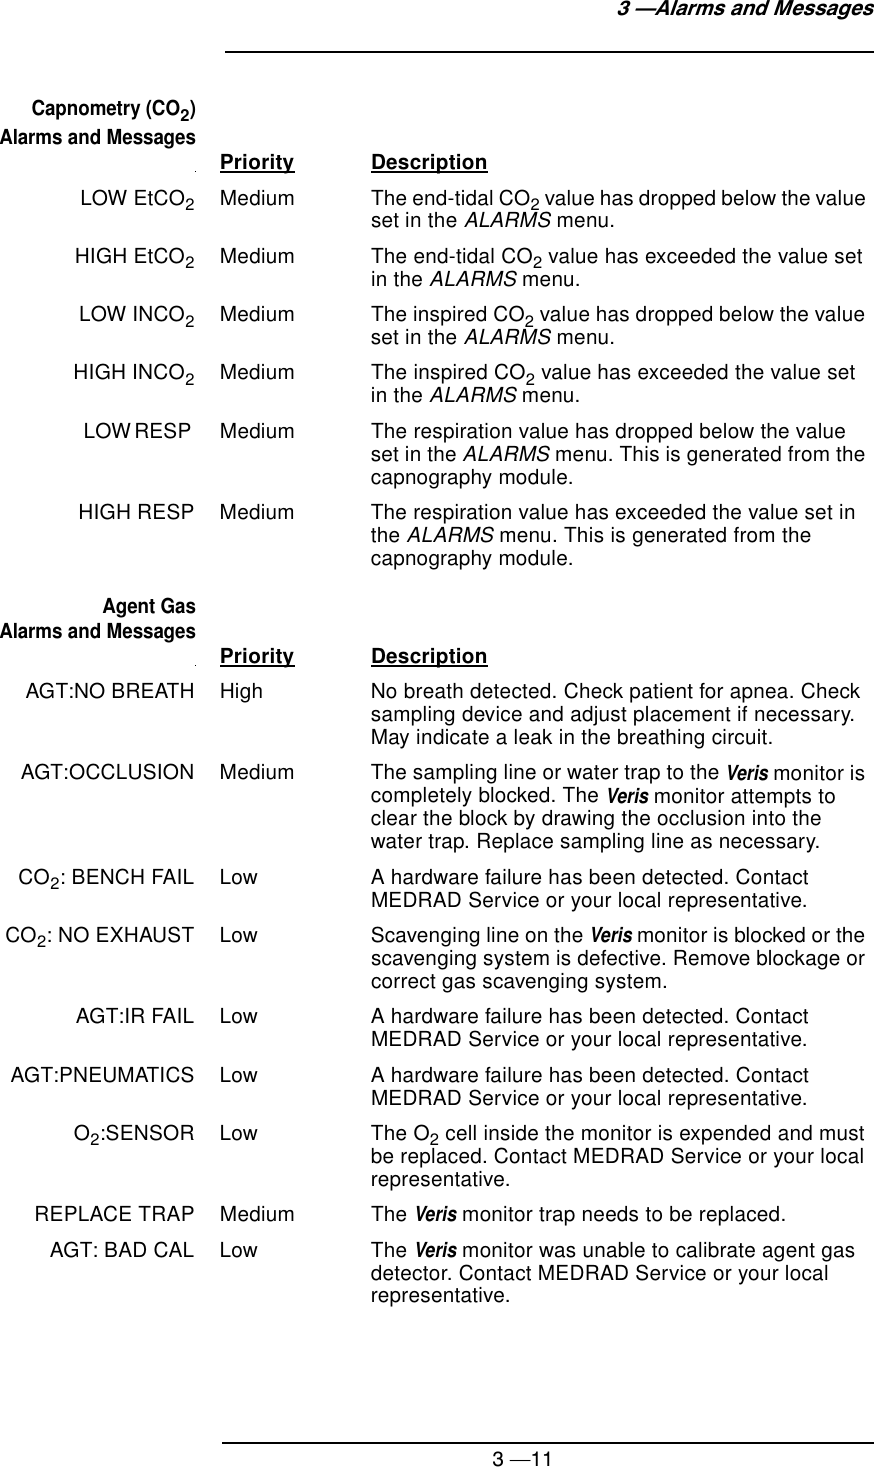 3 —113 —Alarms and MessagesCapnometry (CO2) Alarms and MessagesPriority DescriptionLOW EtCO2Medium The end-tidal CO2 value has dropped below the value set in the ALARMS menu.HIGH EtCO2Medium The end-tidal CO2 value has exceeded the value set in the ALARMS menu.LOW INCO2Medium The inspired CO2 value has dropped below the value set in the ALARMS menu.HIGH INCO2Medium The inspired CO2 value has exceeded the value set in the ALARMS menu.LOW RESP  Medium The respiration value has dropped below the value set in the ALARMS menu. This is generated from the capnography module.HIGH RESP Medium The respiration value has exceeded the value set in the ALARMS menu. This is generated from the capnography module.Agent Gas Alarms and MessagesPriority DescriptionAGT:NO BREATH High No breath detected. Check patient for apnea. Check sampling device and adjust placement if necessary. May indicate a leak in the breathing circuit.AGT:OCCLUSION Medium The sampling line or water trap to the Veris monitor is completely blocked. The Veris monitor attempts to clear the block by drawing the occlusion into the water trap. Replace sampling line as necessary.CO2: BENCH FAIL Low A hardware failure has been detected. Contact MEDRAD Service or your local representative.CO2: NO EXHAUST Low Scavenging line on the Veris monitor is blocked or the scavenging system is defective. Remove blockage or correct gas scavenging system.AGT:IR FAIL Low A hardware failure has been detected. Contact MEDRAD Service or your local representative.AGT:PNEUMATICS Low A hardware failure has been detected. Contact MEDRAD Service or your local representative.O2:SENSOR Low The O2 cell inside the monitor is expended and must be replaced. Contact MEDRAD Service or your local representative.REPLACE TRAP Medium The Veris monitor trap needs to be replaced.AGT: BAD CAL Low The Veris monitor was unable to calibrate agent gas detector. Contact MEDRAD Service or your local representative.